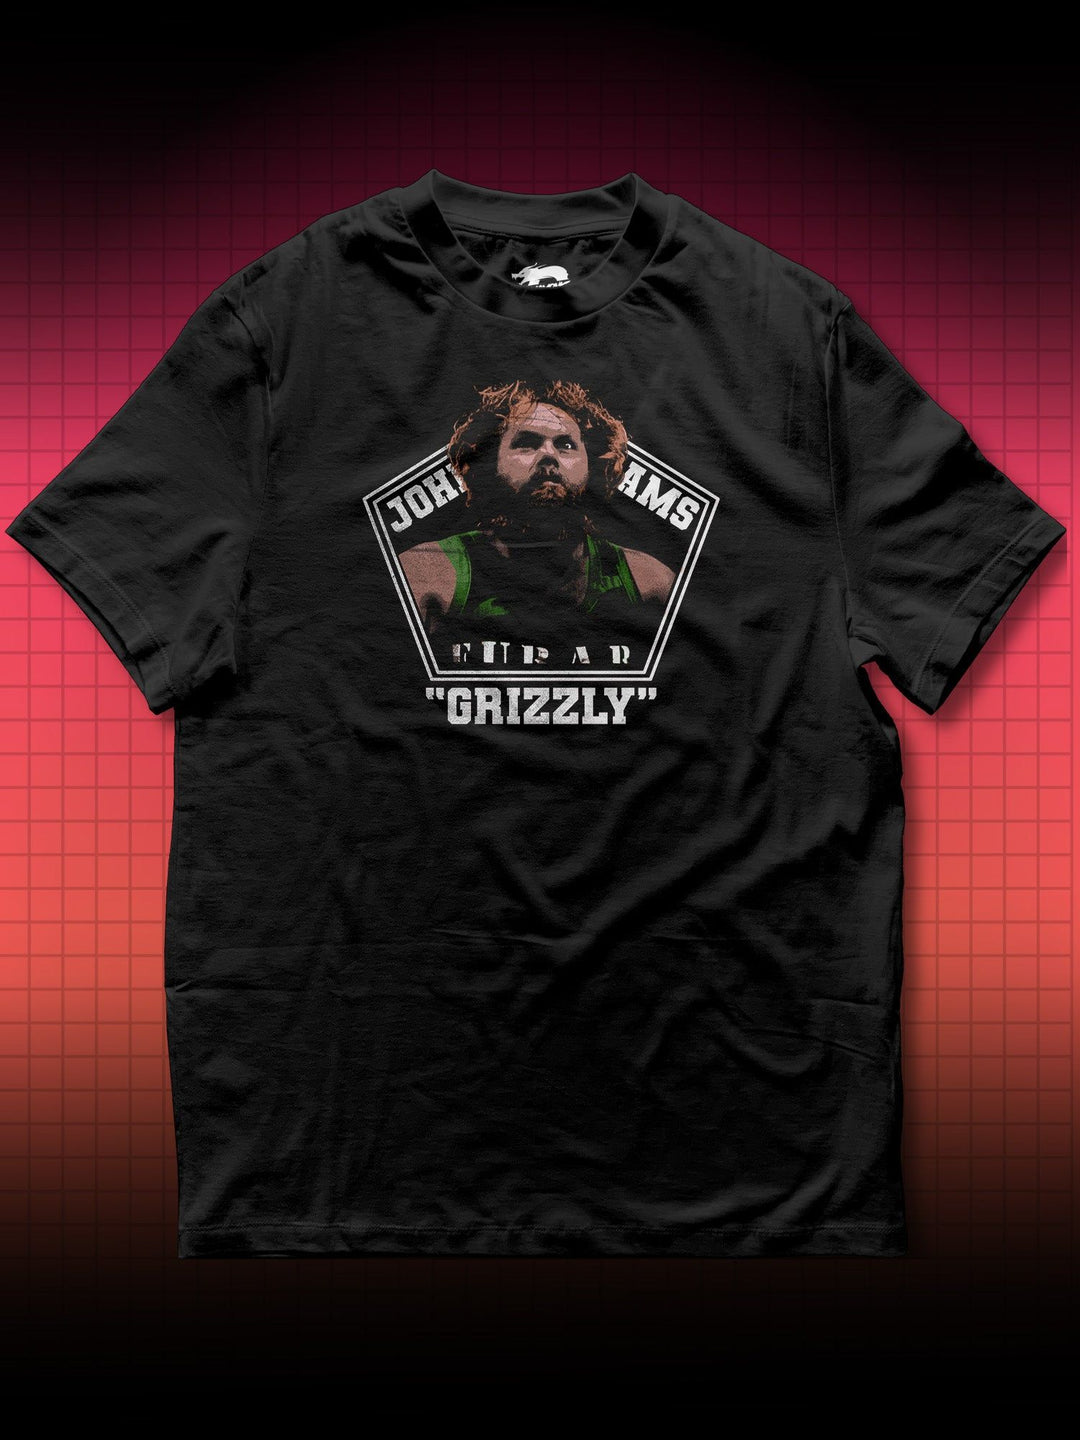 OVER THE TOP - JOHN GRIZZLY ADAMS | SYLVESTER STALLONE 80S RETRO | T-SHIRT - DRAMAMONKS